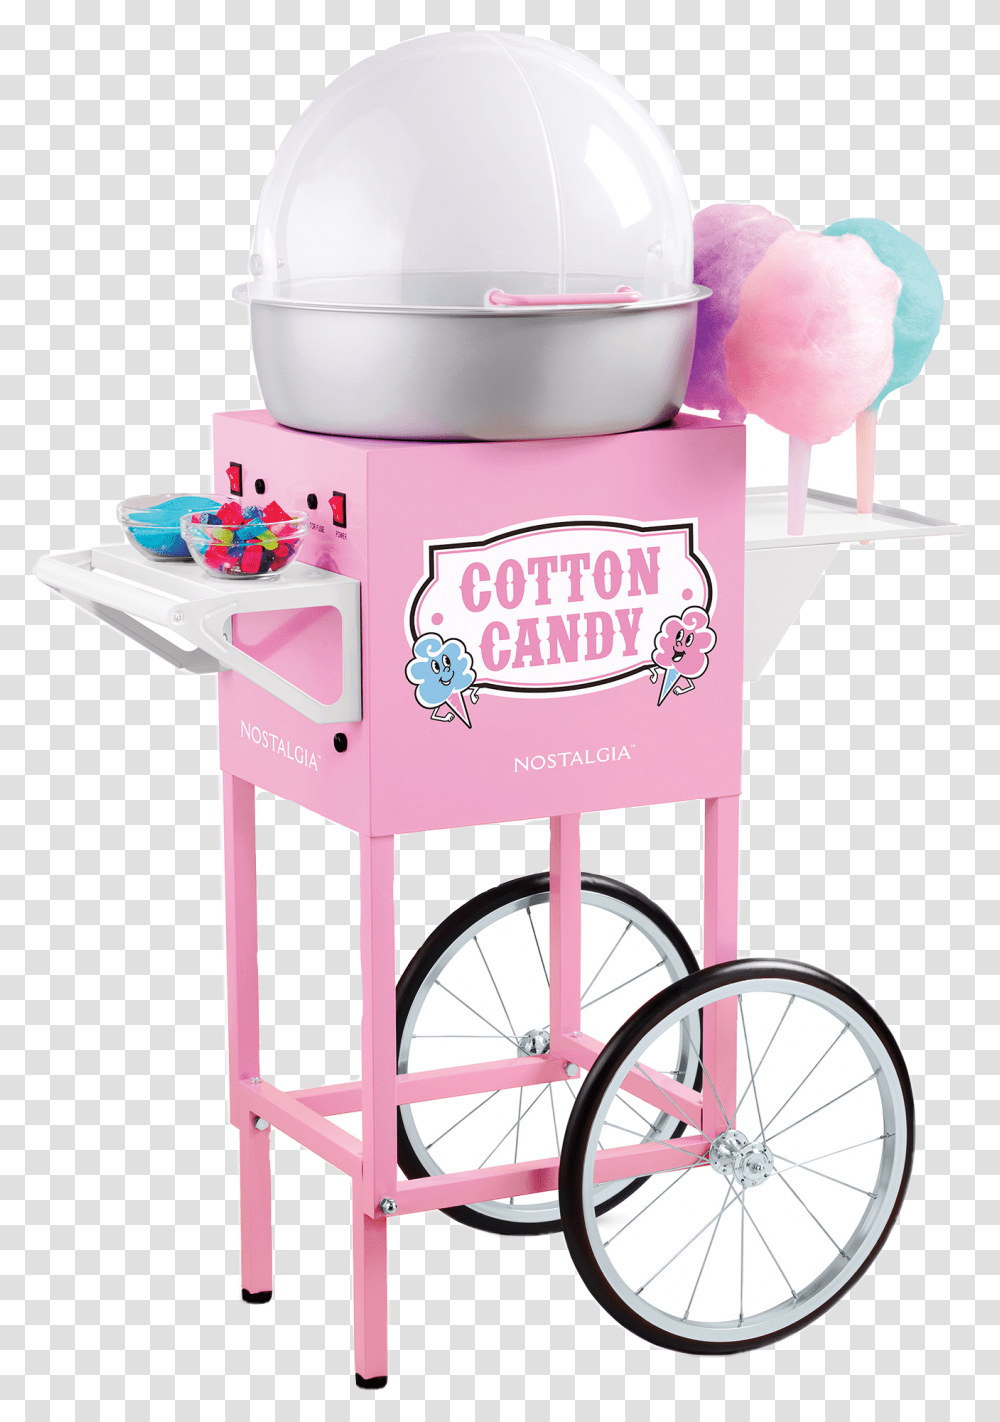 Candy Cottoncandy Fair Carnival Food Nostalgia Cotton Candy Machine, Wheel, Chair, Furniture Transparent Png